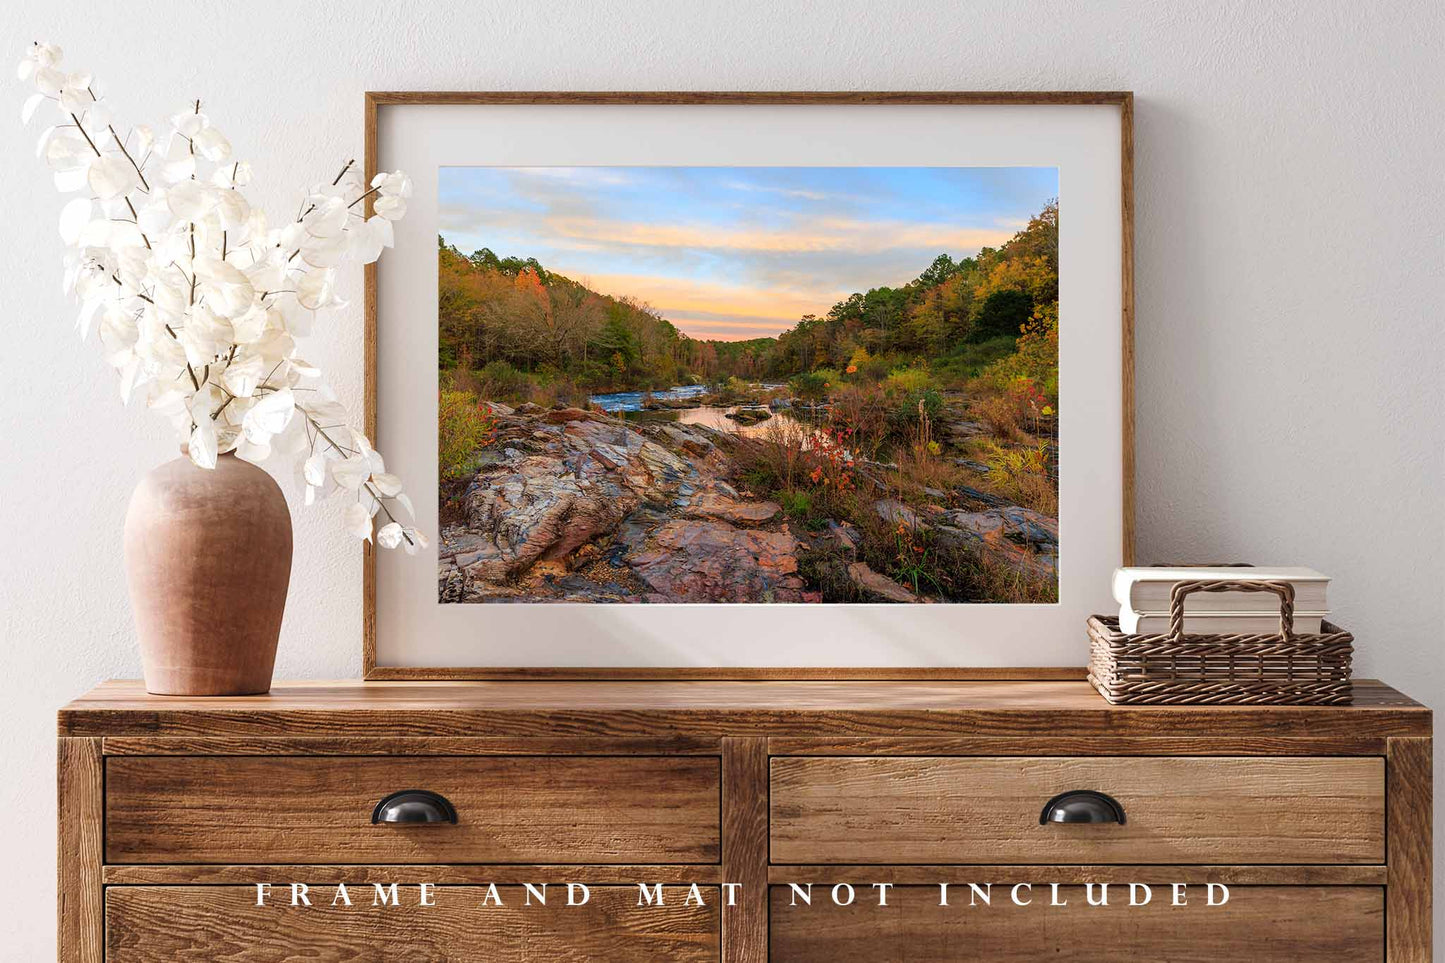 Beavers Bend Photography Print (Not Framed) Picture of Fall Color Surrounding Creek at Sunset on Autumn Evening near Broken Bow Lake Oklahoma Landscape Wall Art Nature Decor